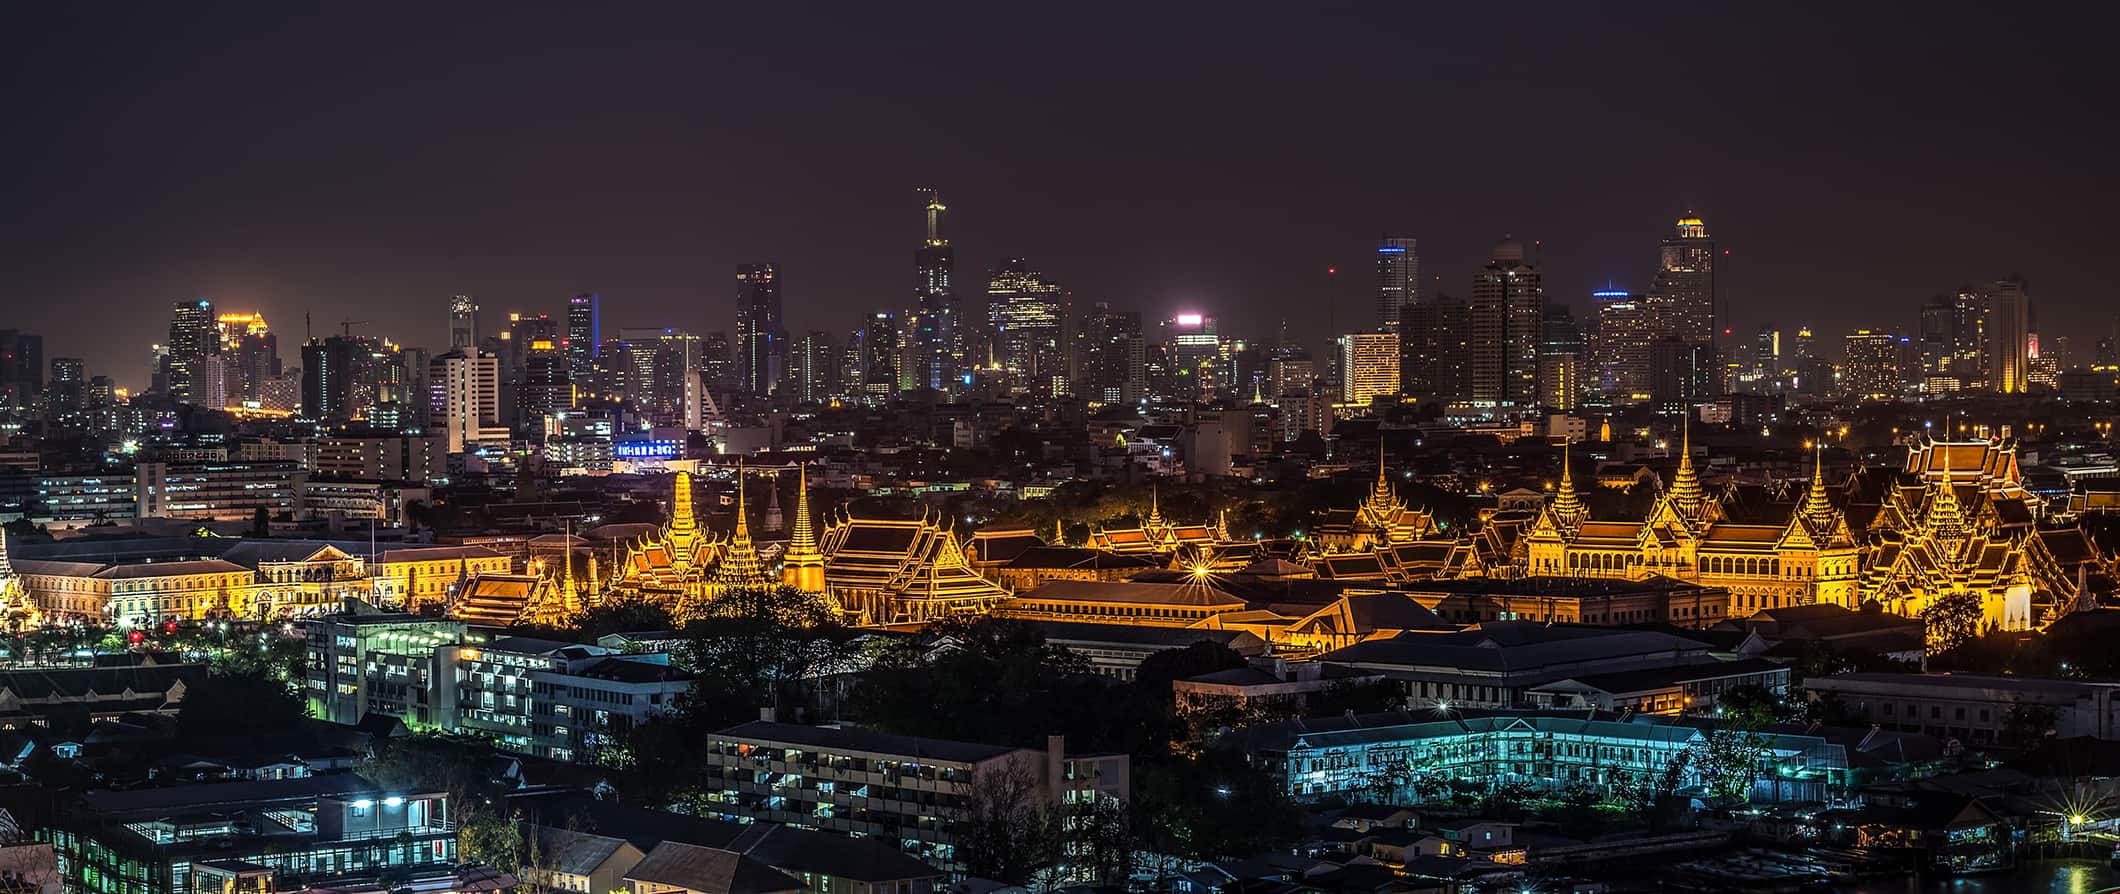 Skyline of Bangkok, Thailand at night, with low buildings in the foreground, a temple complex in the center, and modern skyscrapers in the background